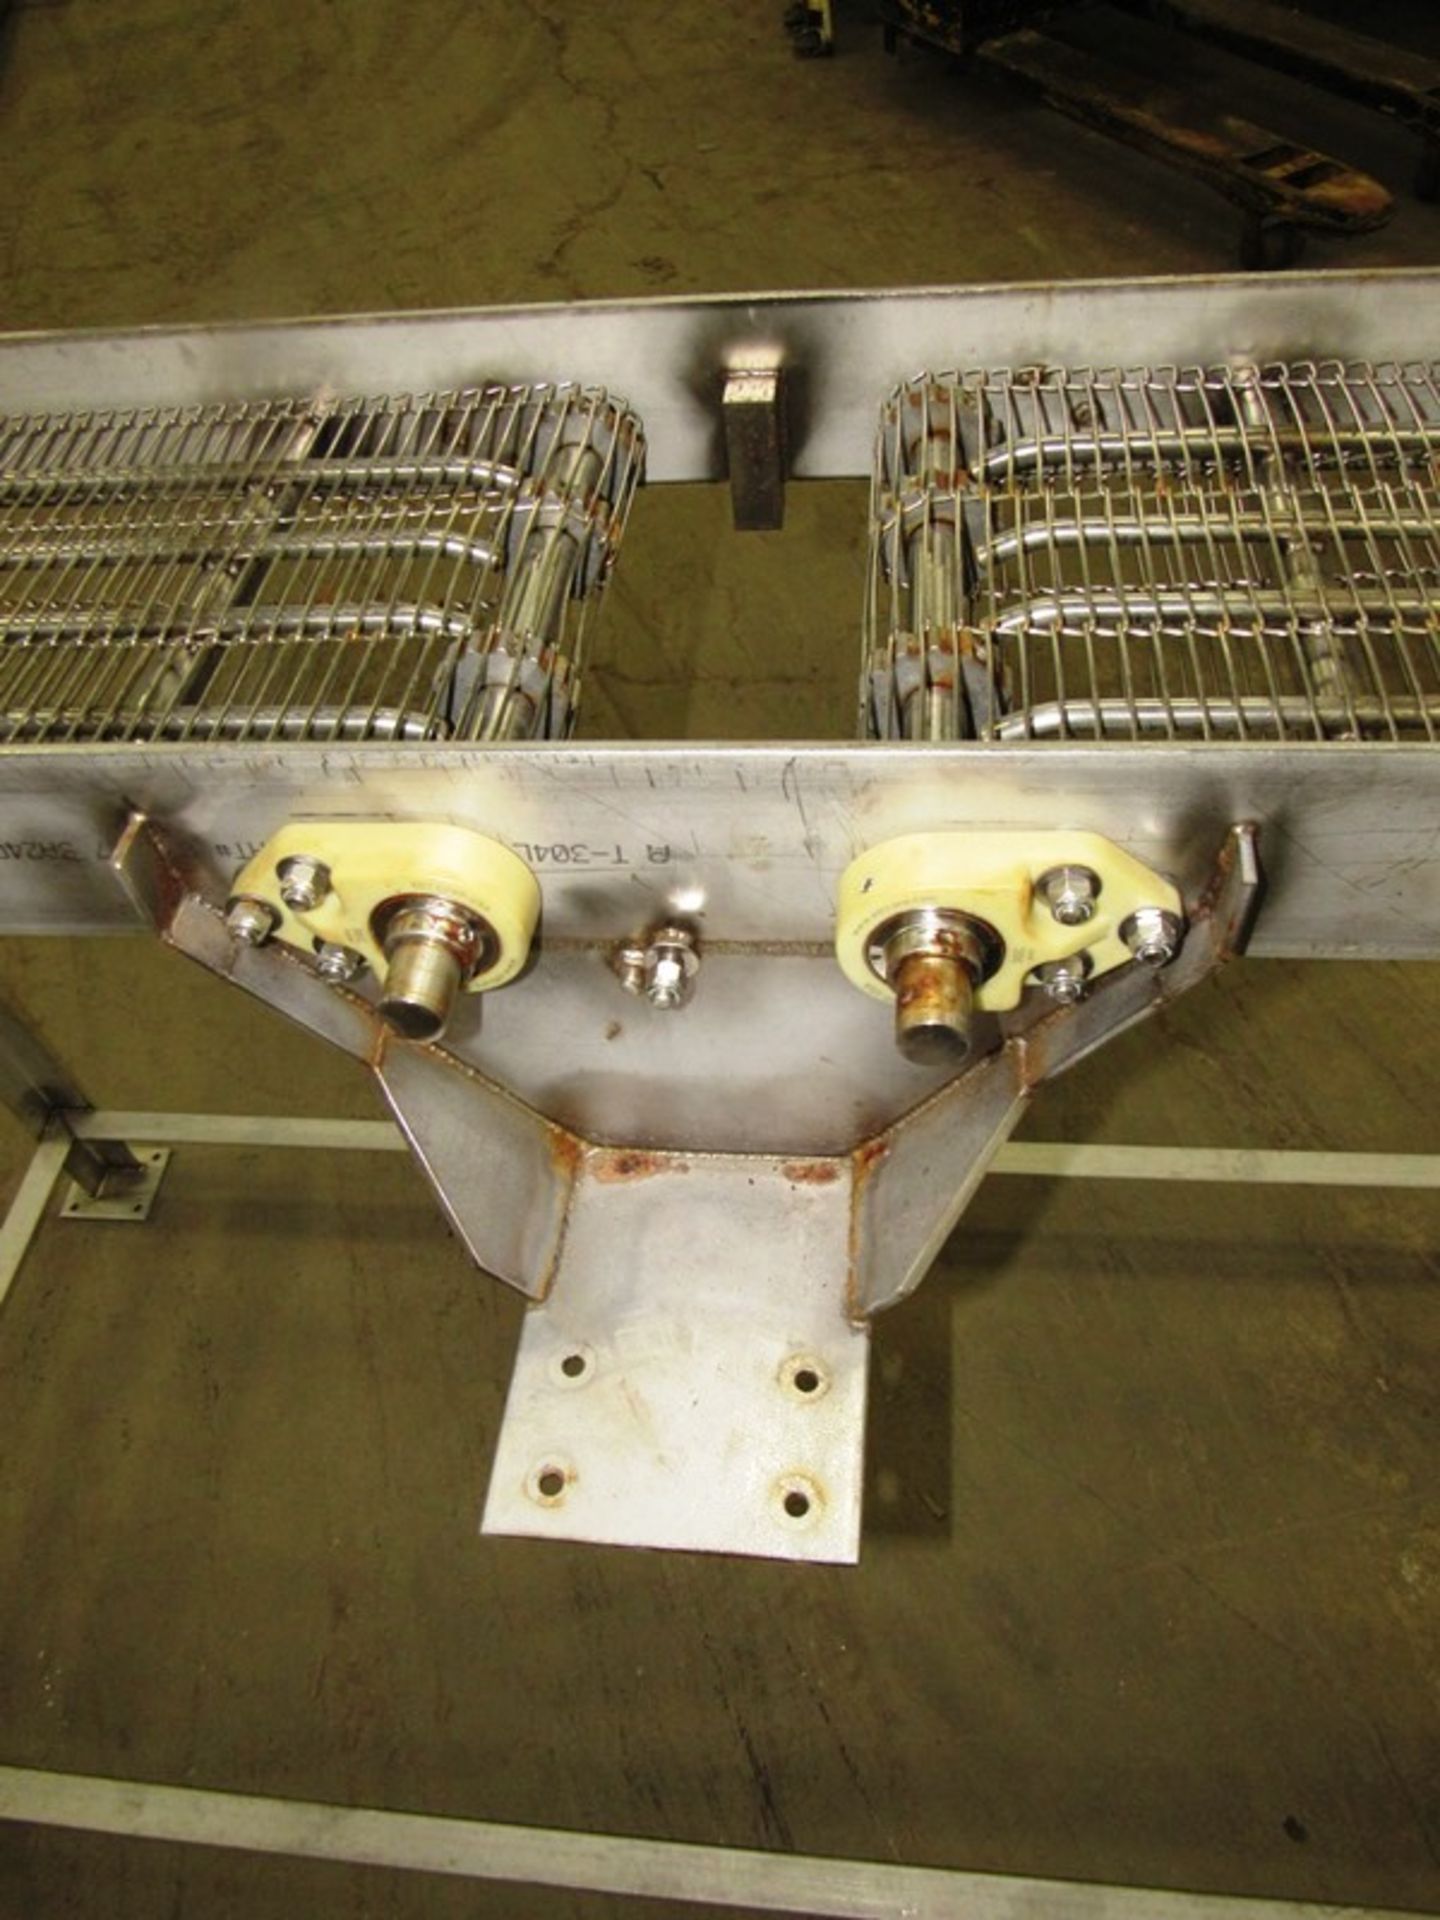 Stainless Steel Conveyor, 12" W X 90" L (2 belts 39" L) with 5" space between, no drive - Image 4 of 4